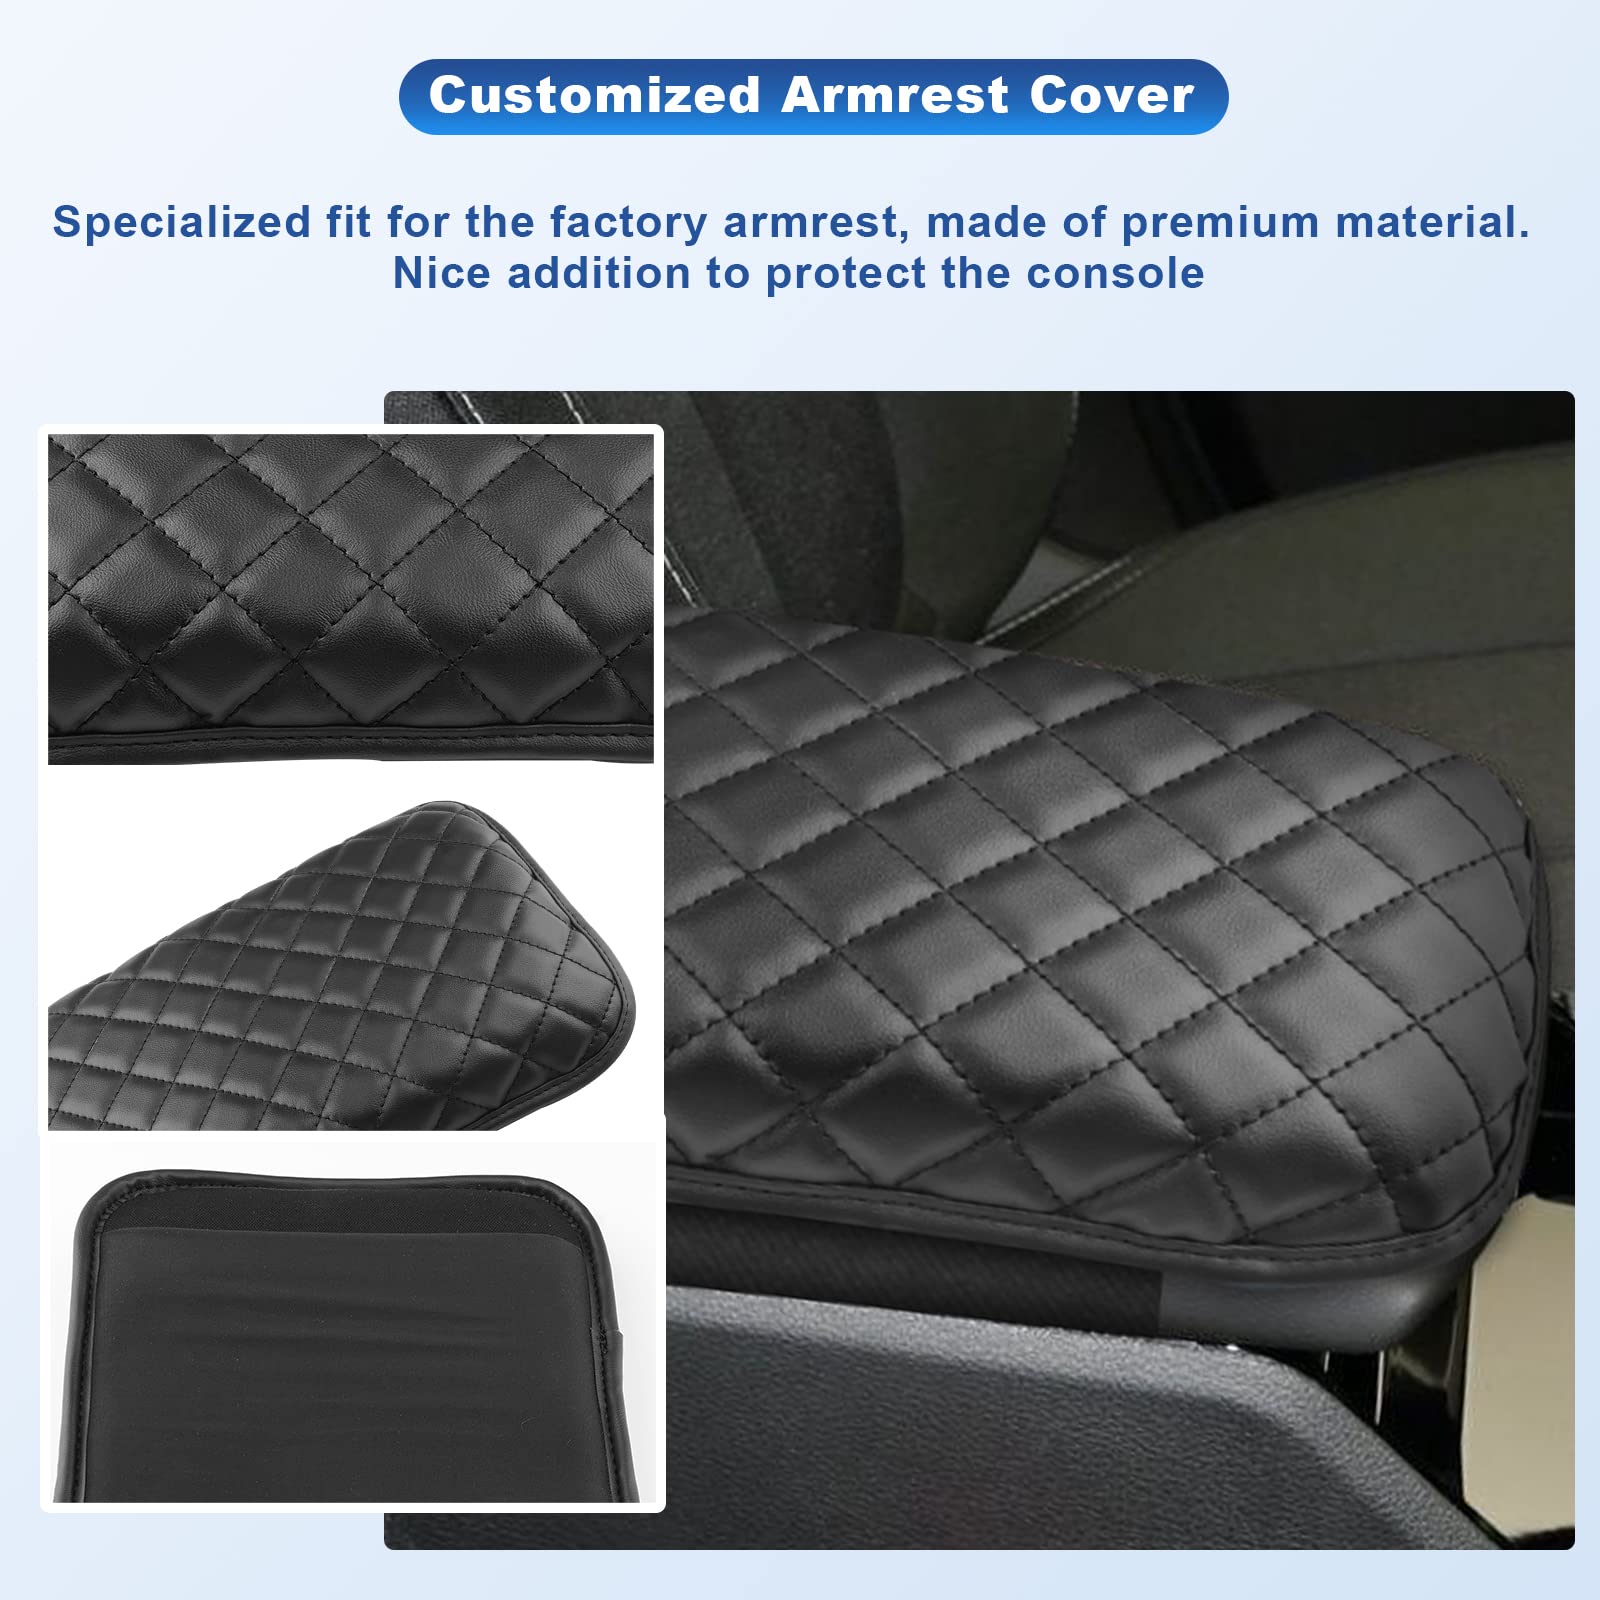 Jeep Grand Cherokee Armrest Cover 2011+ - LFOTPP Car Accessories